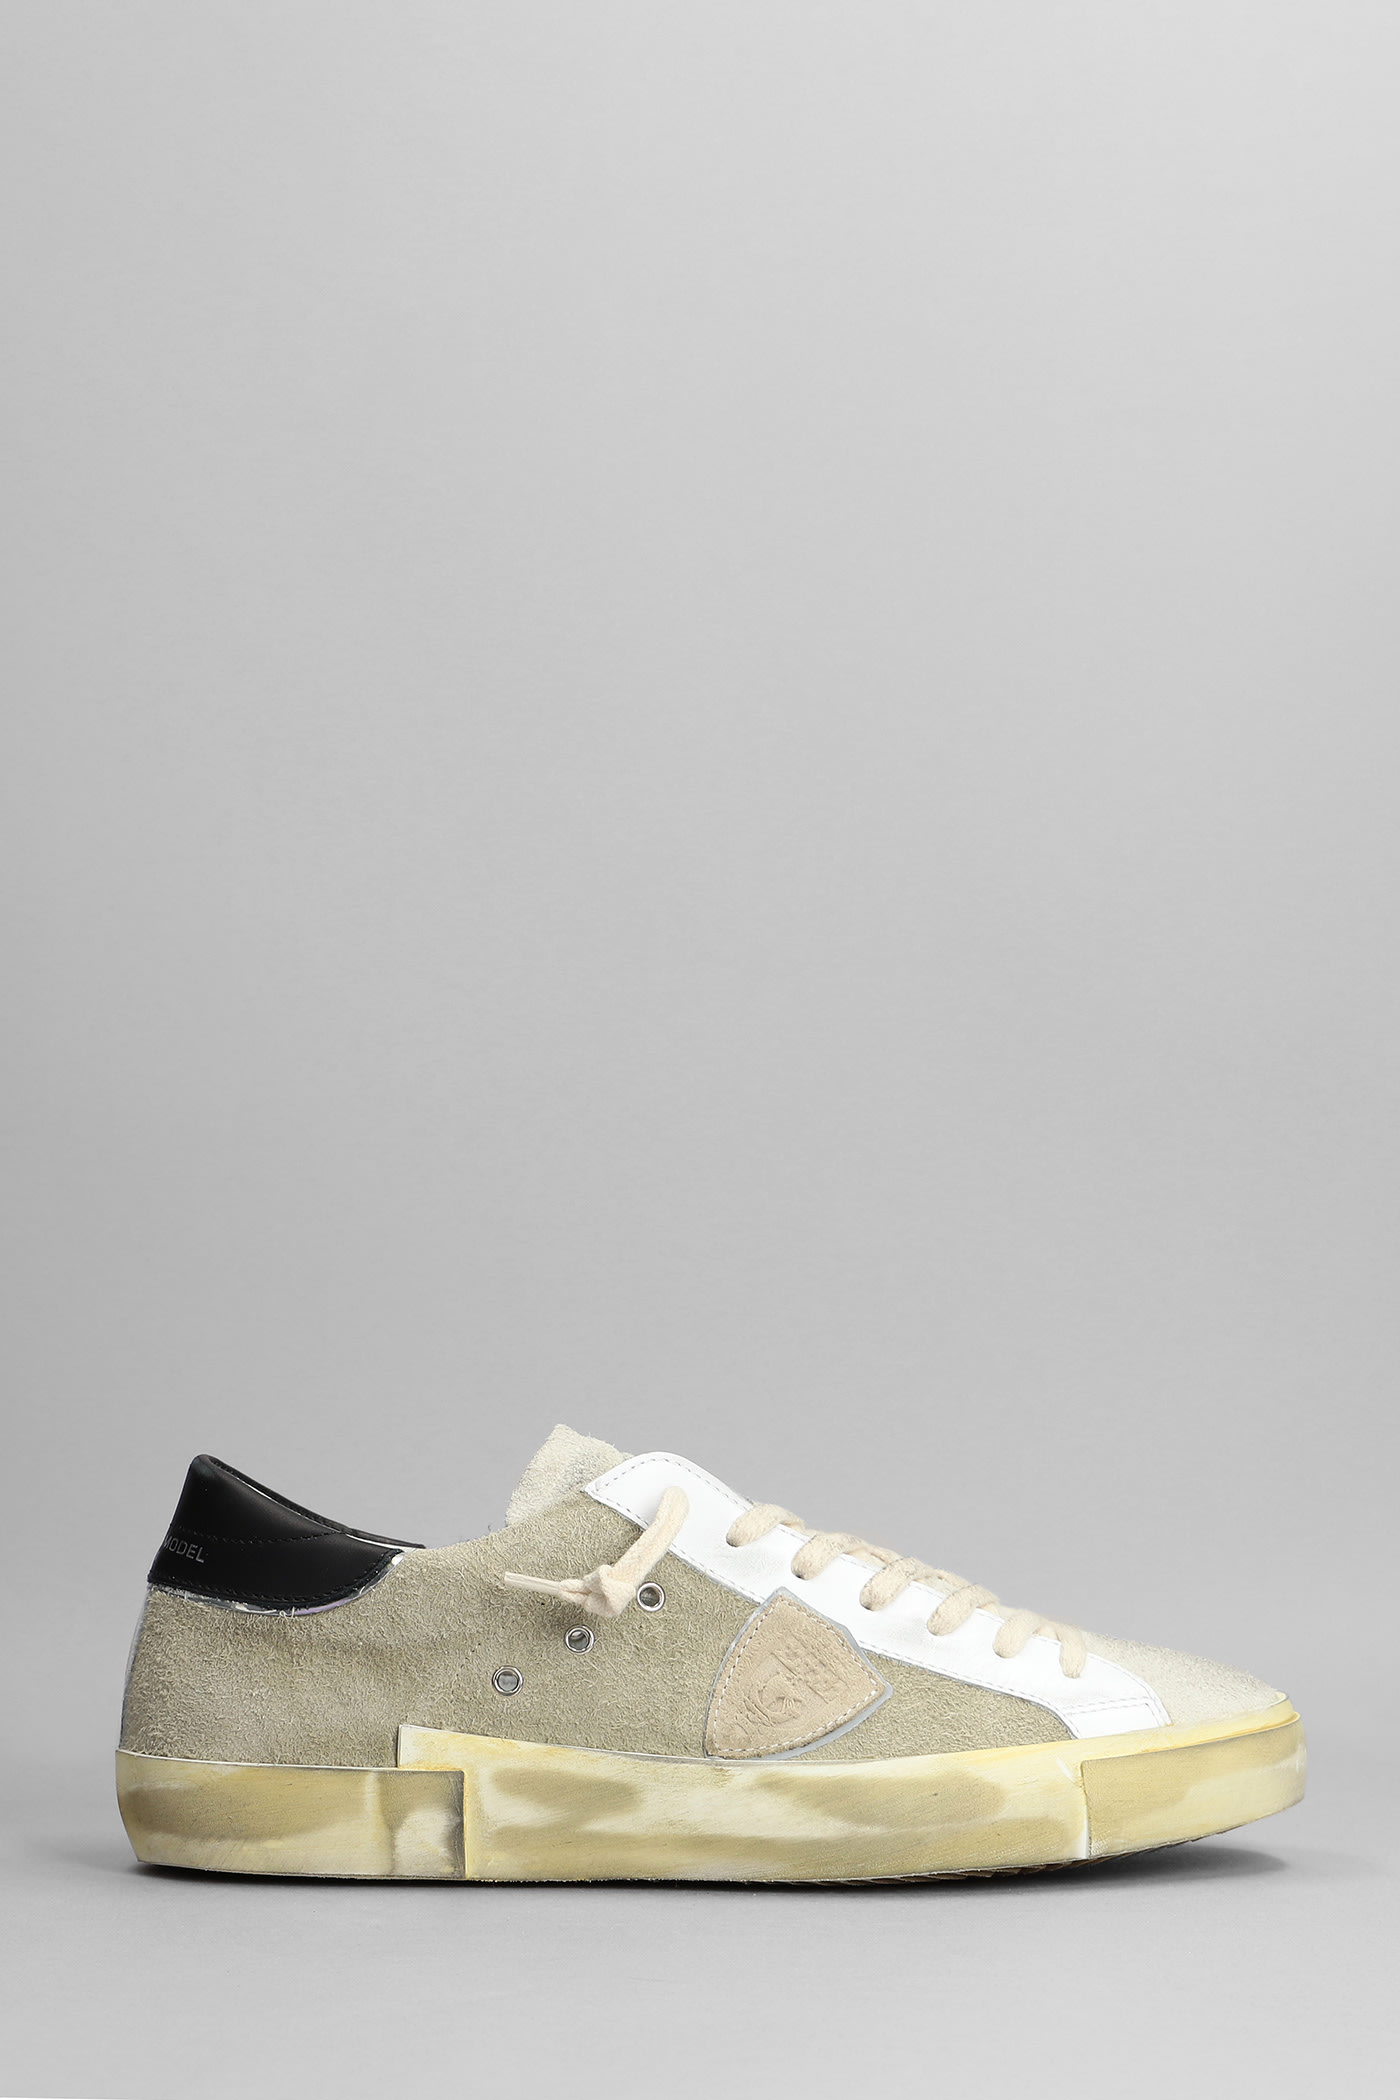 Philippe Model Prsx Sneakers In Beige Suede And Leather